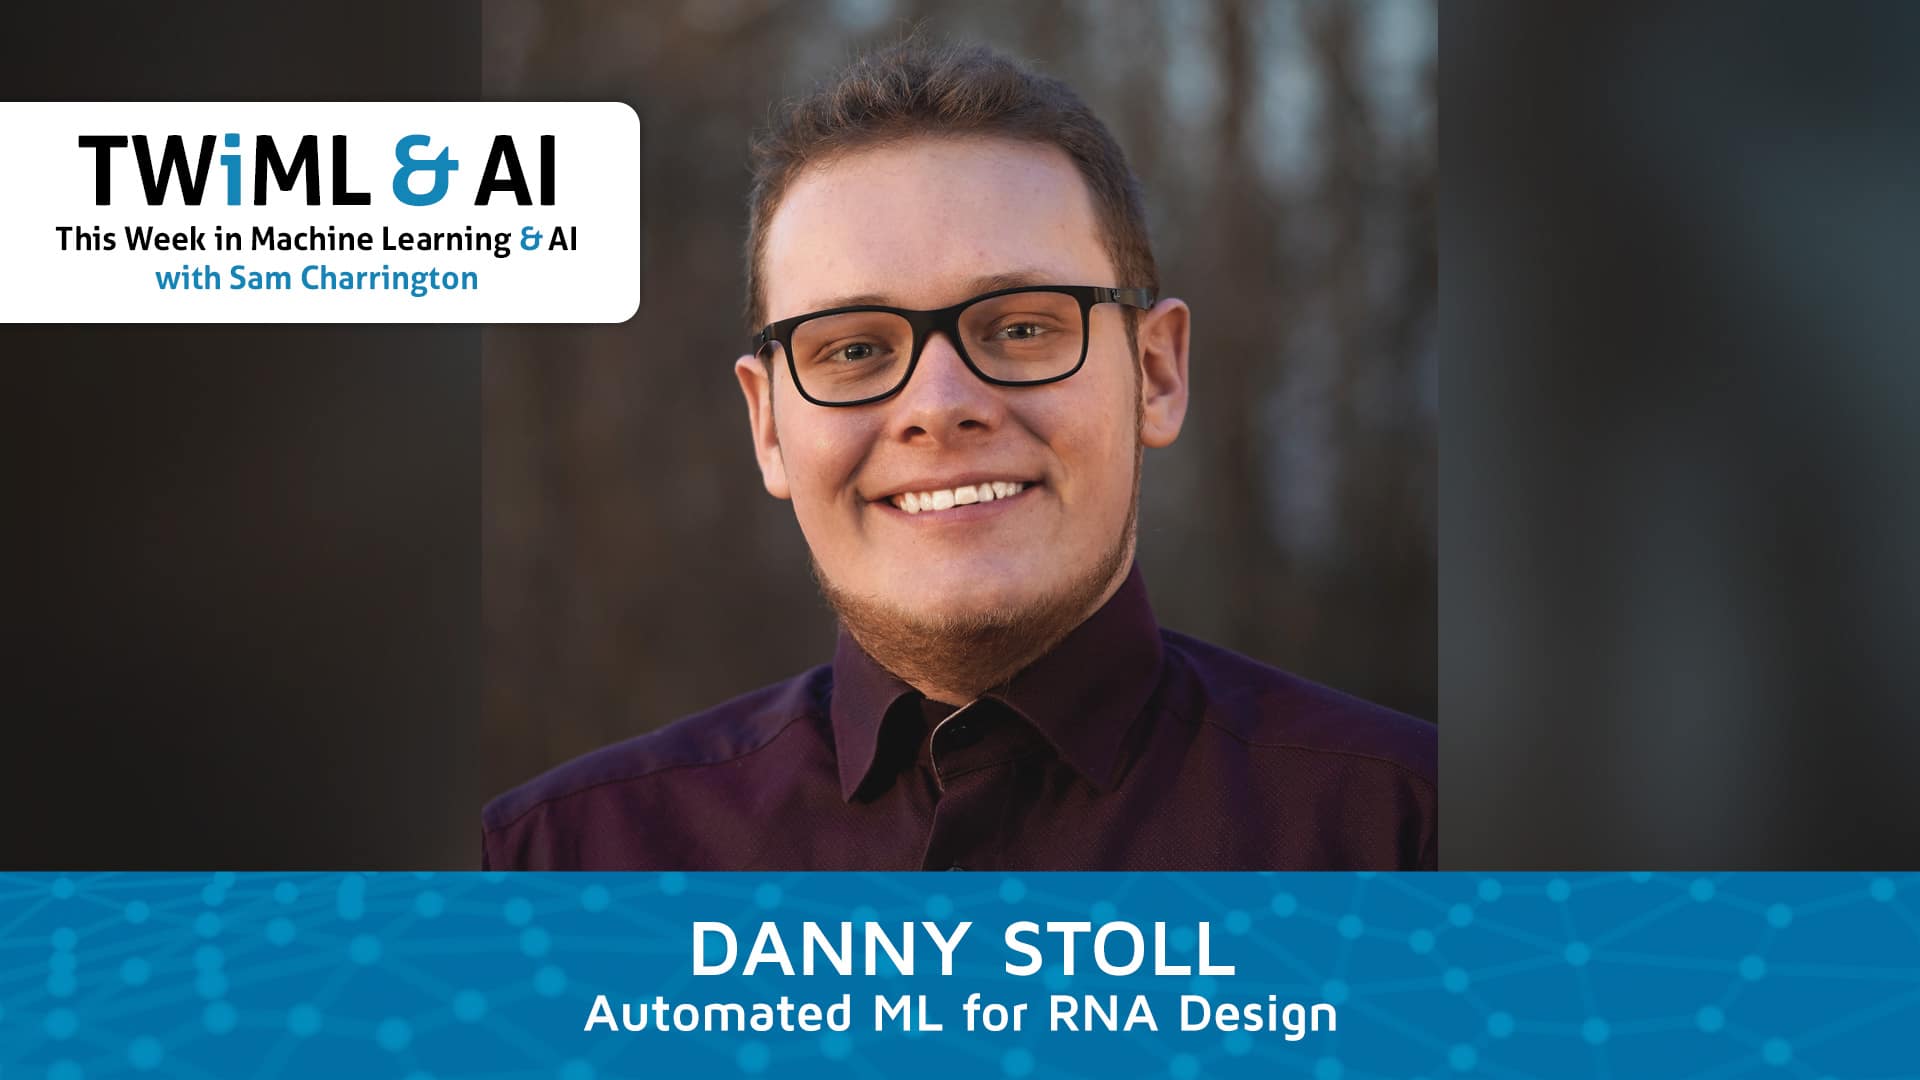 Banner Image: Danny Stoll - Podcast Interview